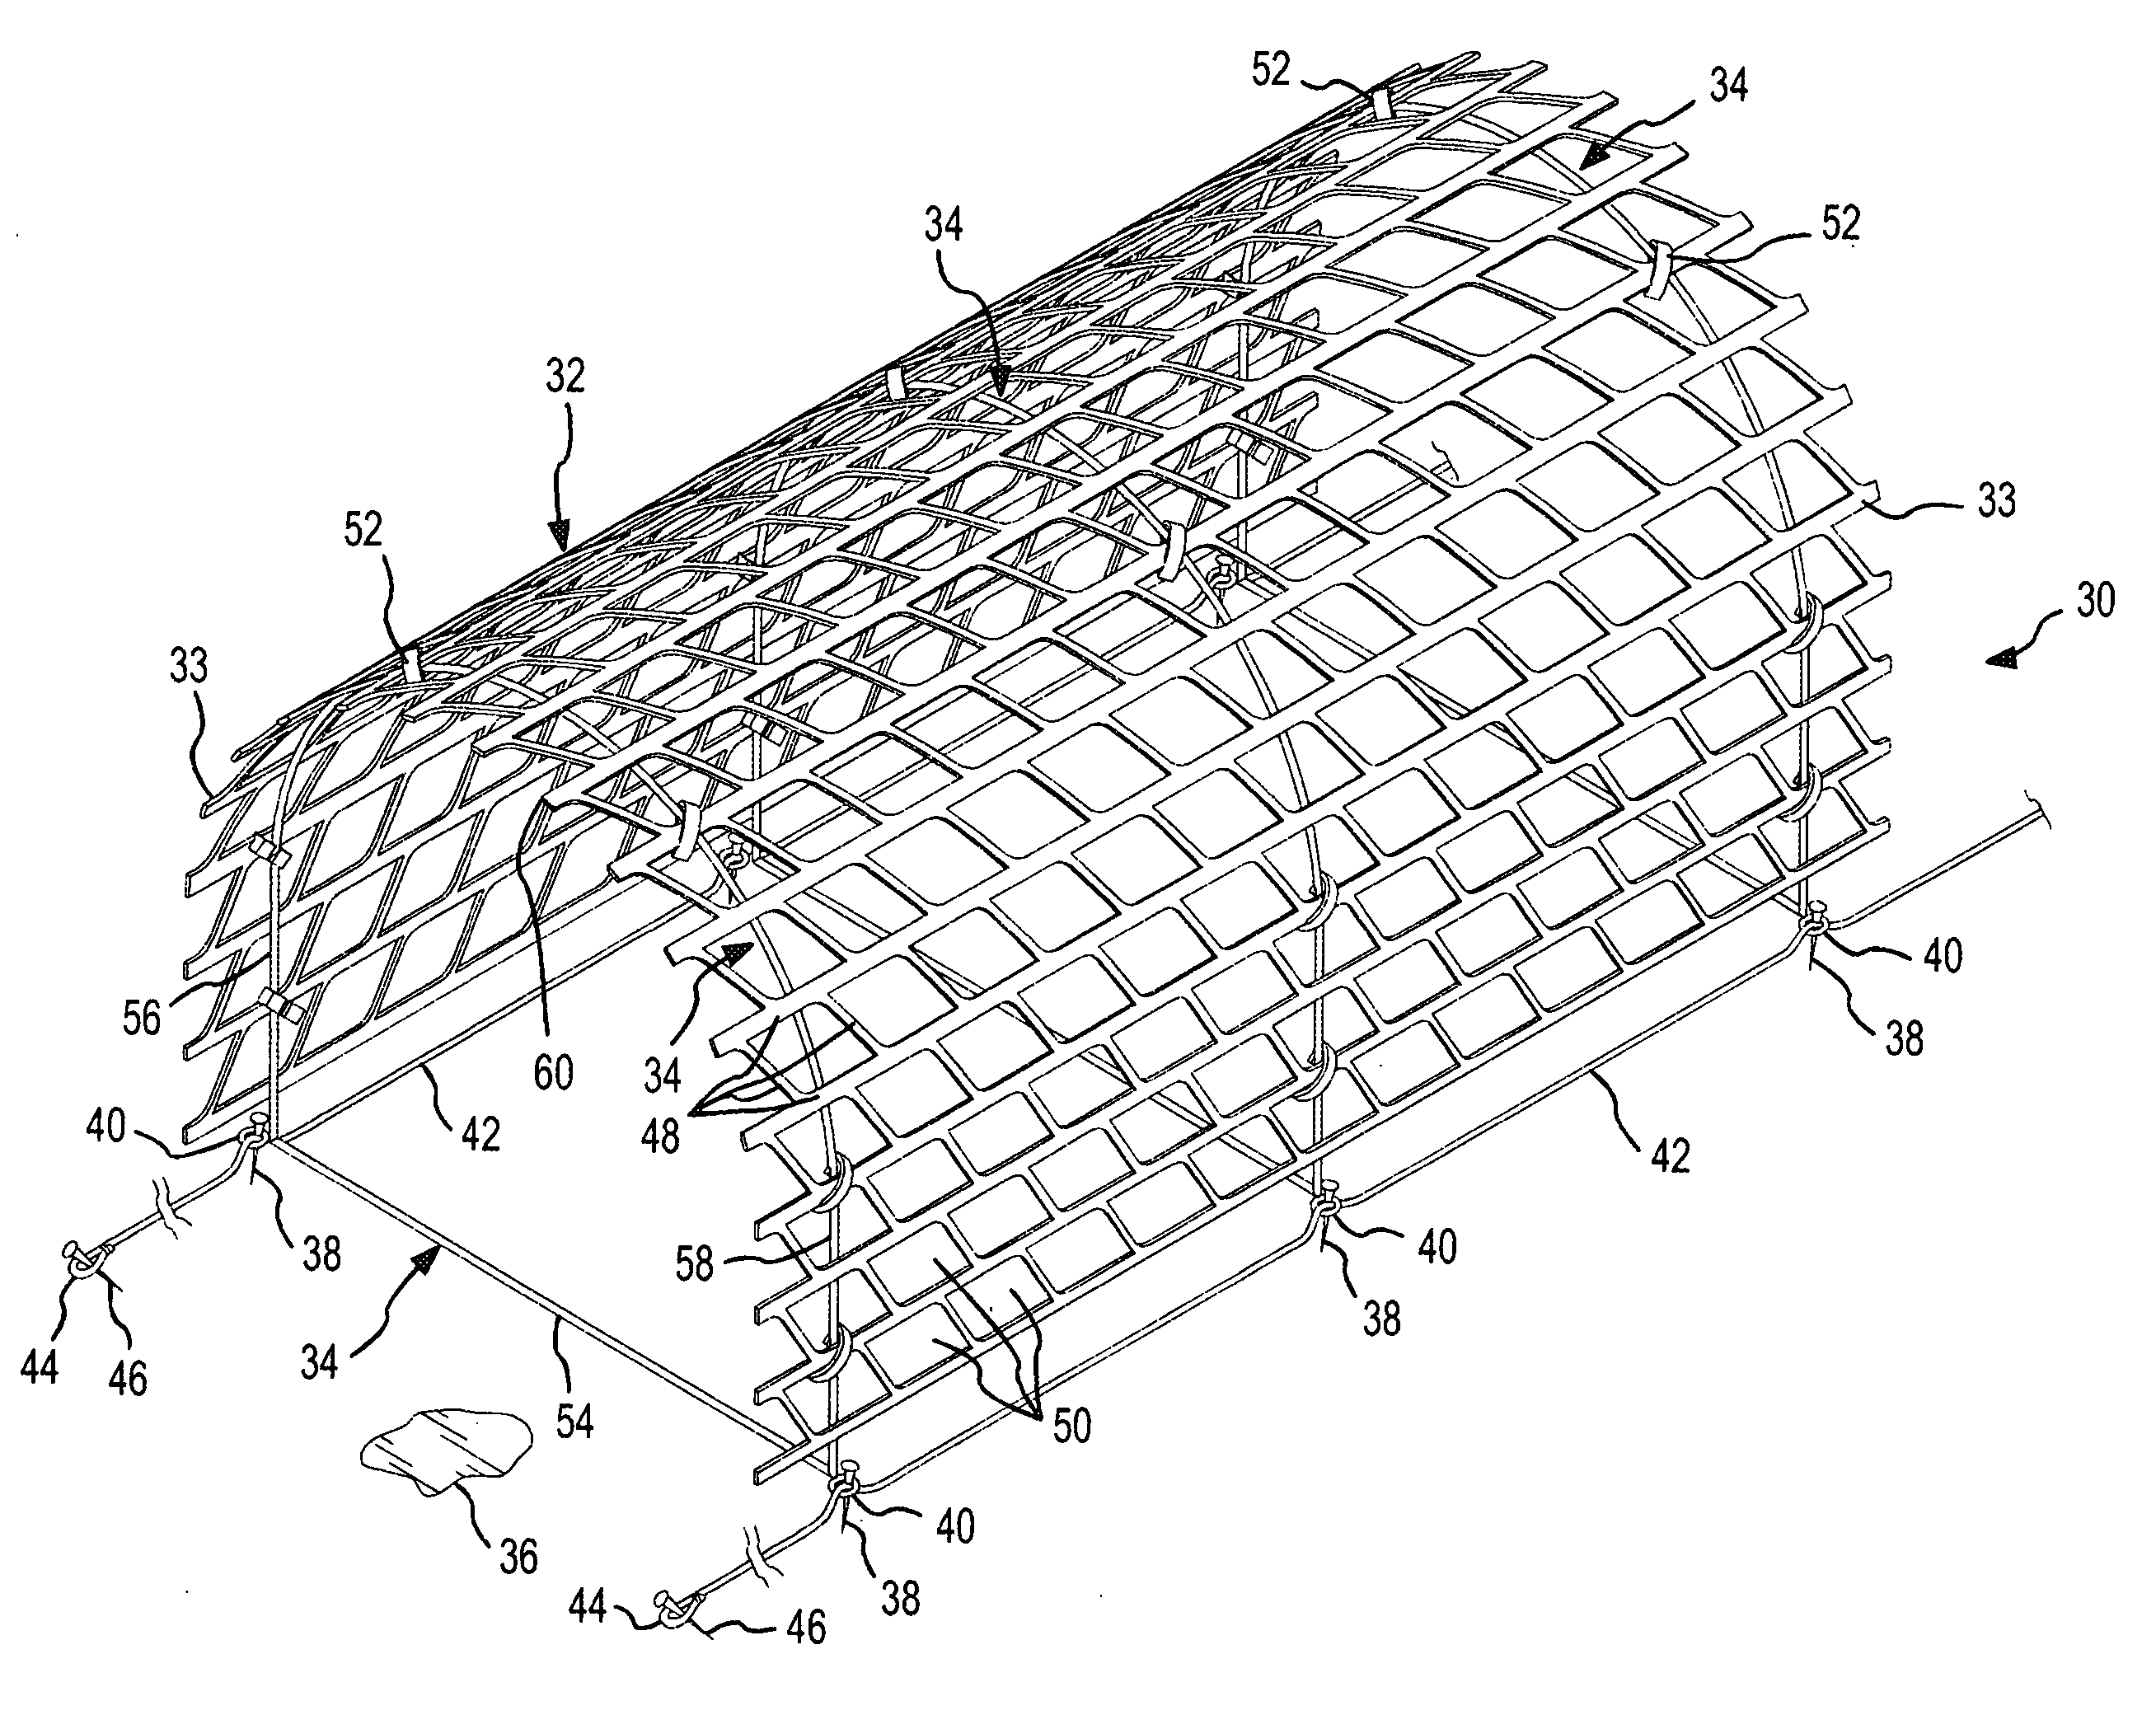 Apparatus and method for efficiently fabricating, dismantling and storing a porous tubular windblown particle control device